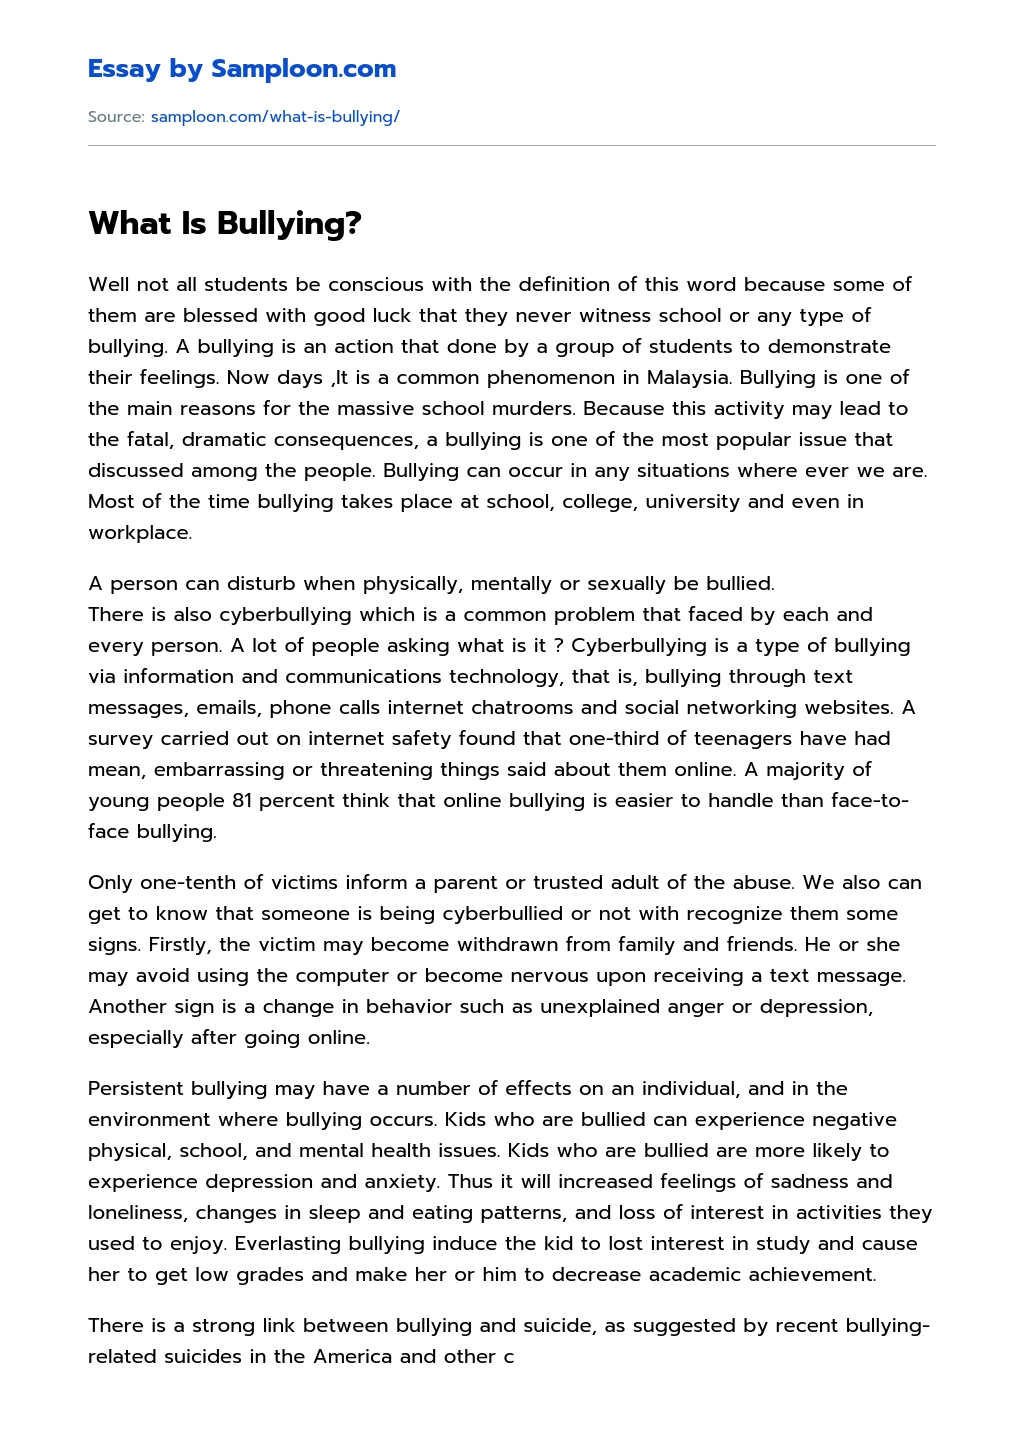 argumentative articles on bullying